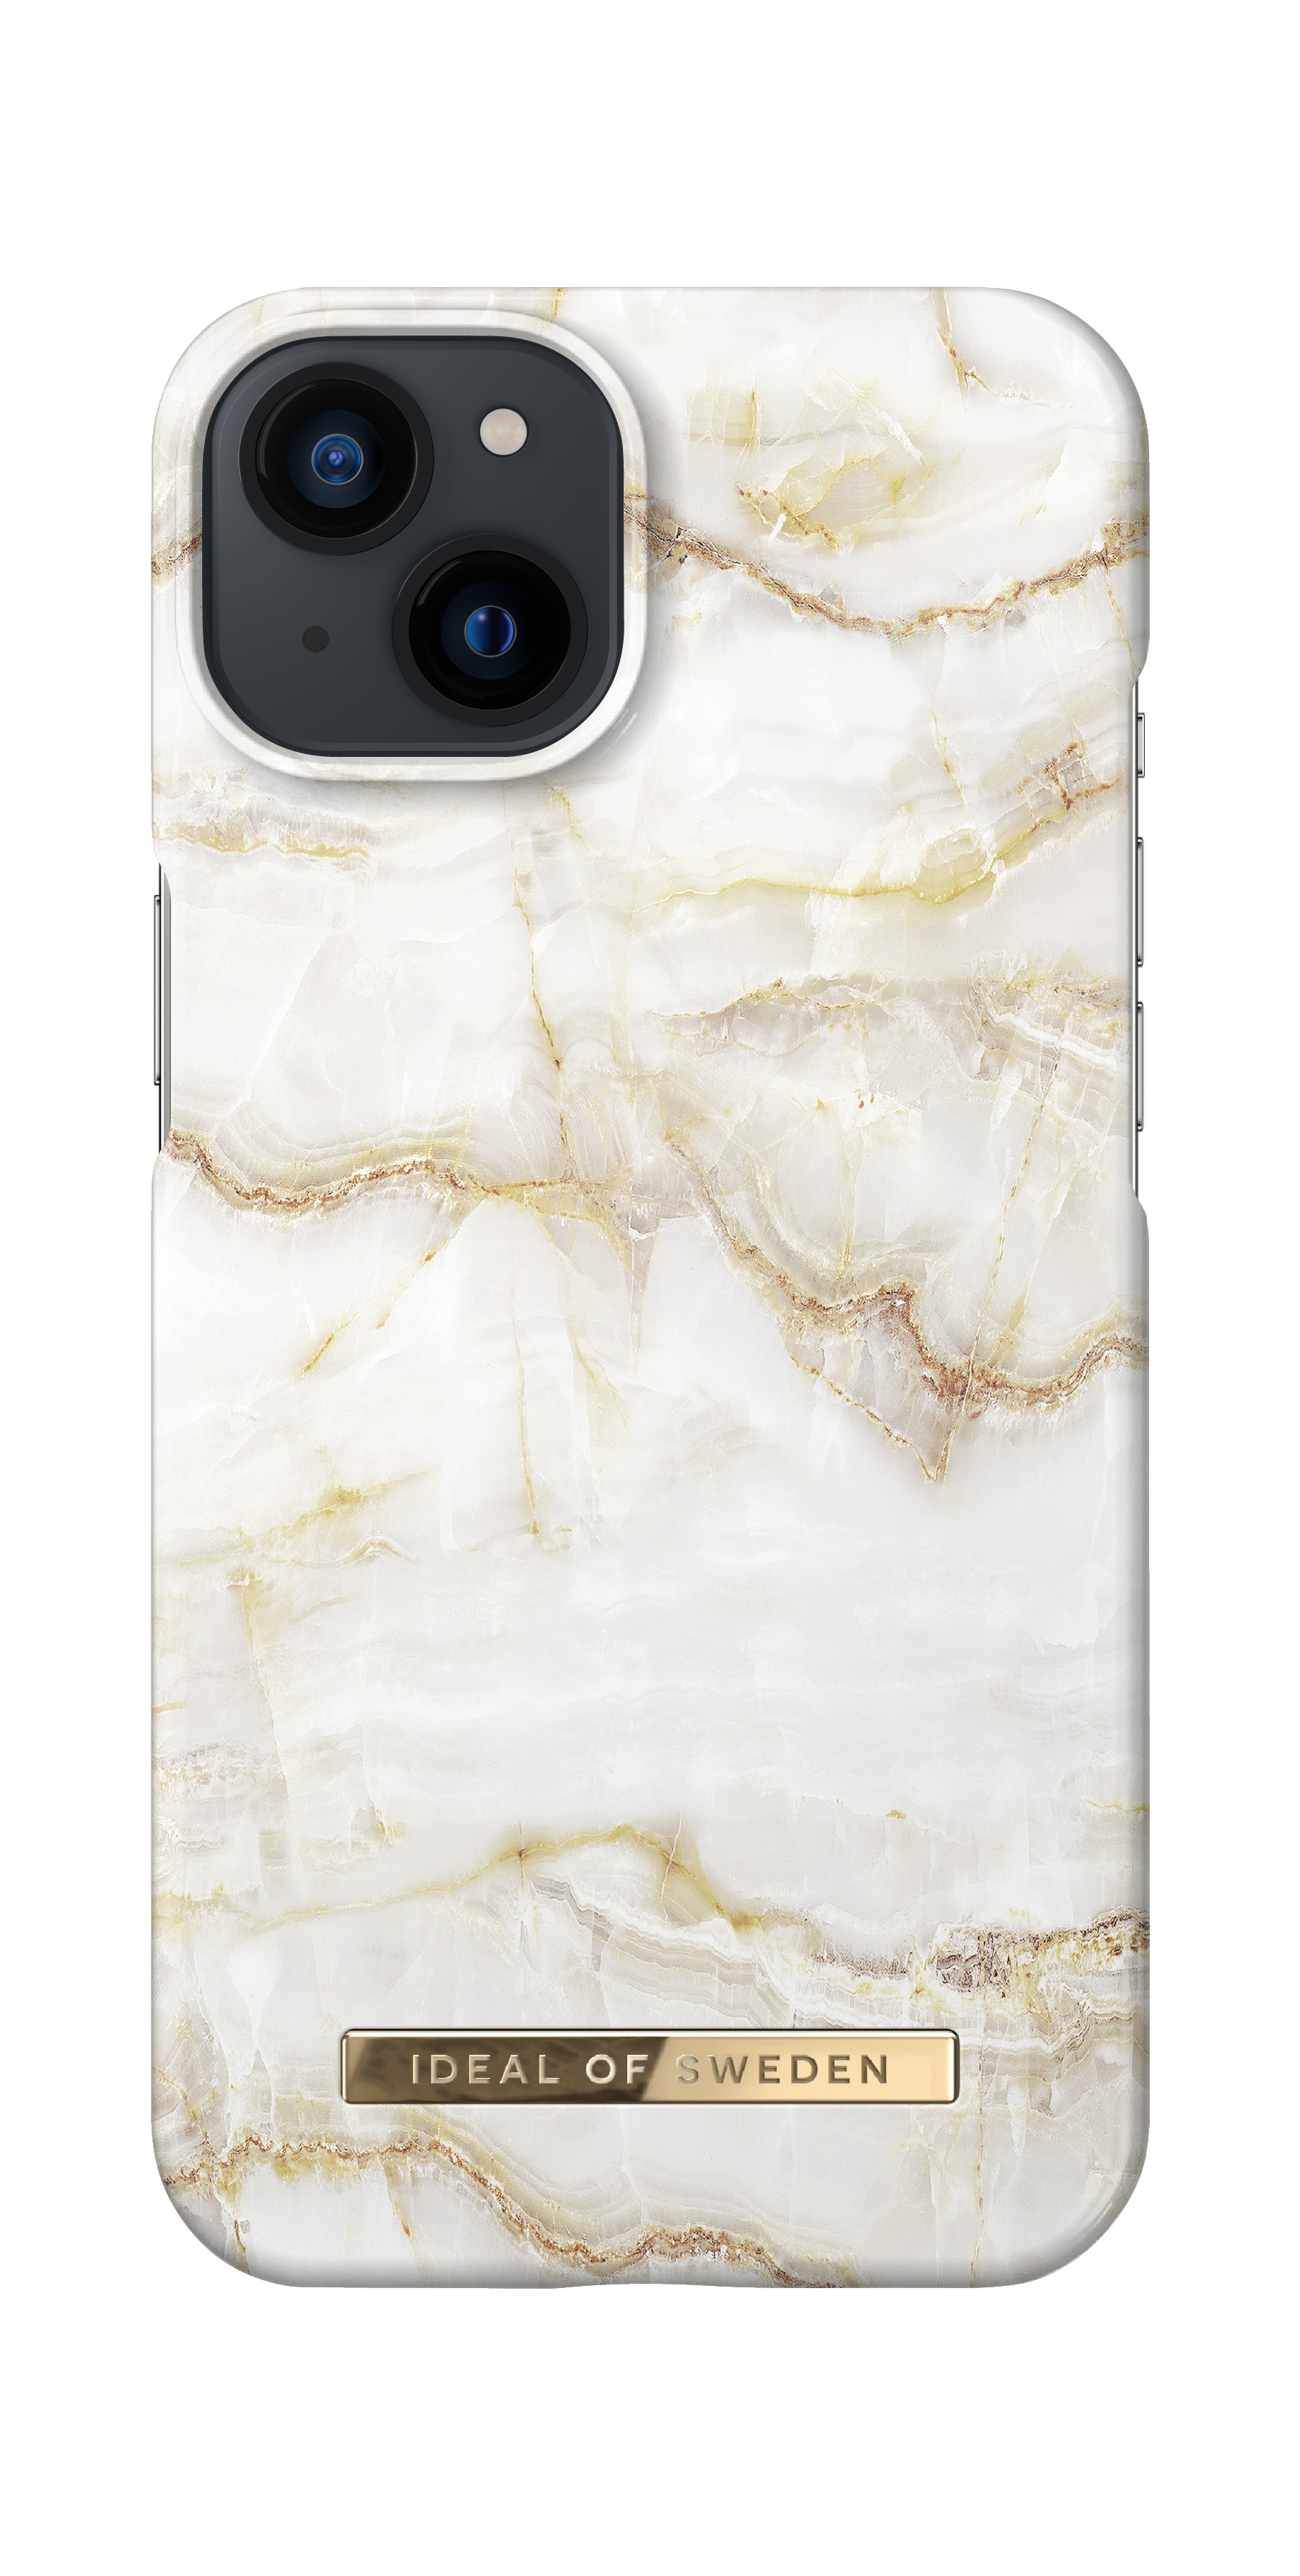 Fashion Case iPhone 13 Golden Pearl Marble